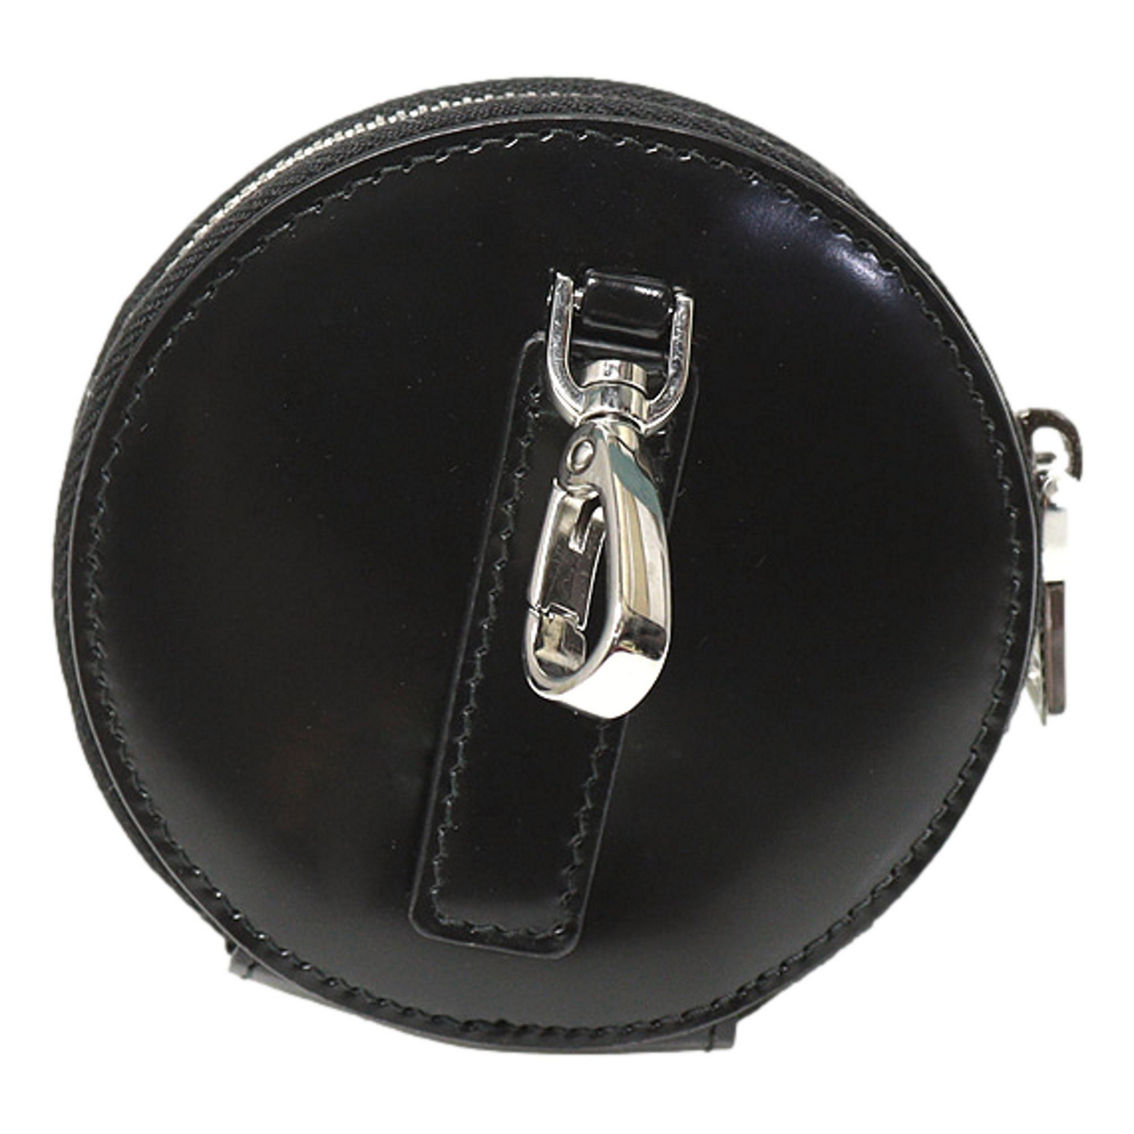 Prada Triangle Plaque Smooth Black Leather Round Mini Pouch Keychain (New) - Image 4 of 5